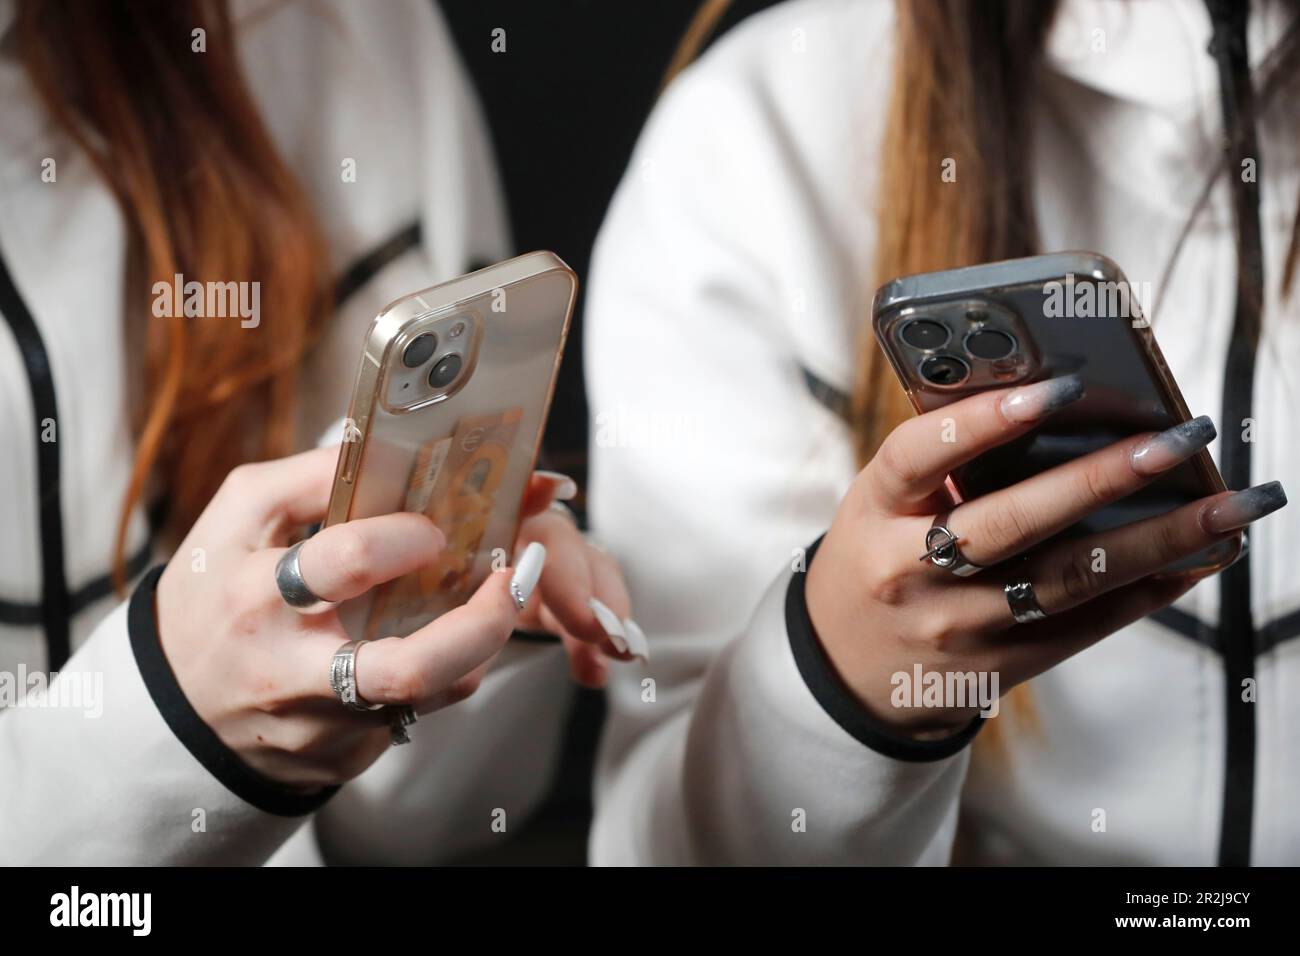 Female hands with smartphones close up, two women using mobile phones, France, Europe Stock Photo